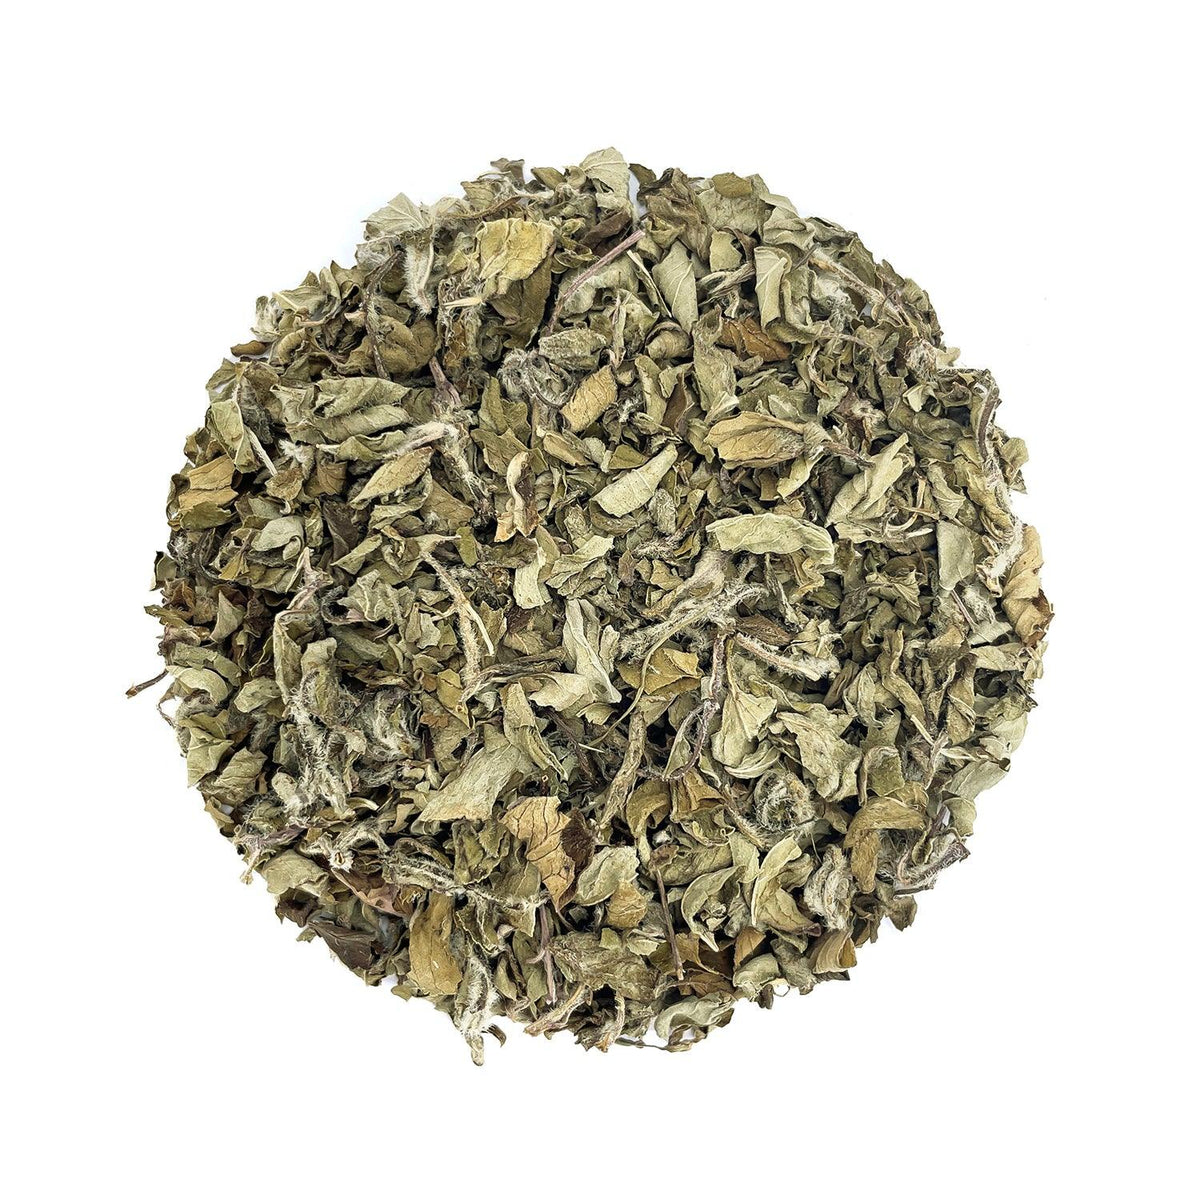 Get Best Organic Dried Thyme Leaves Online